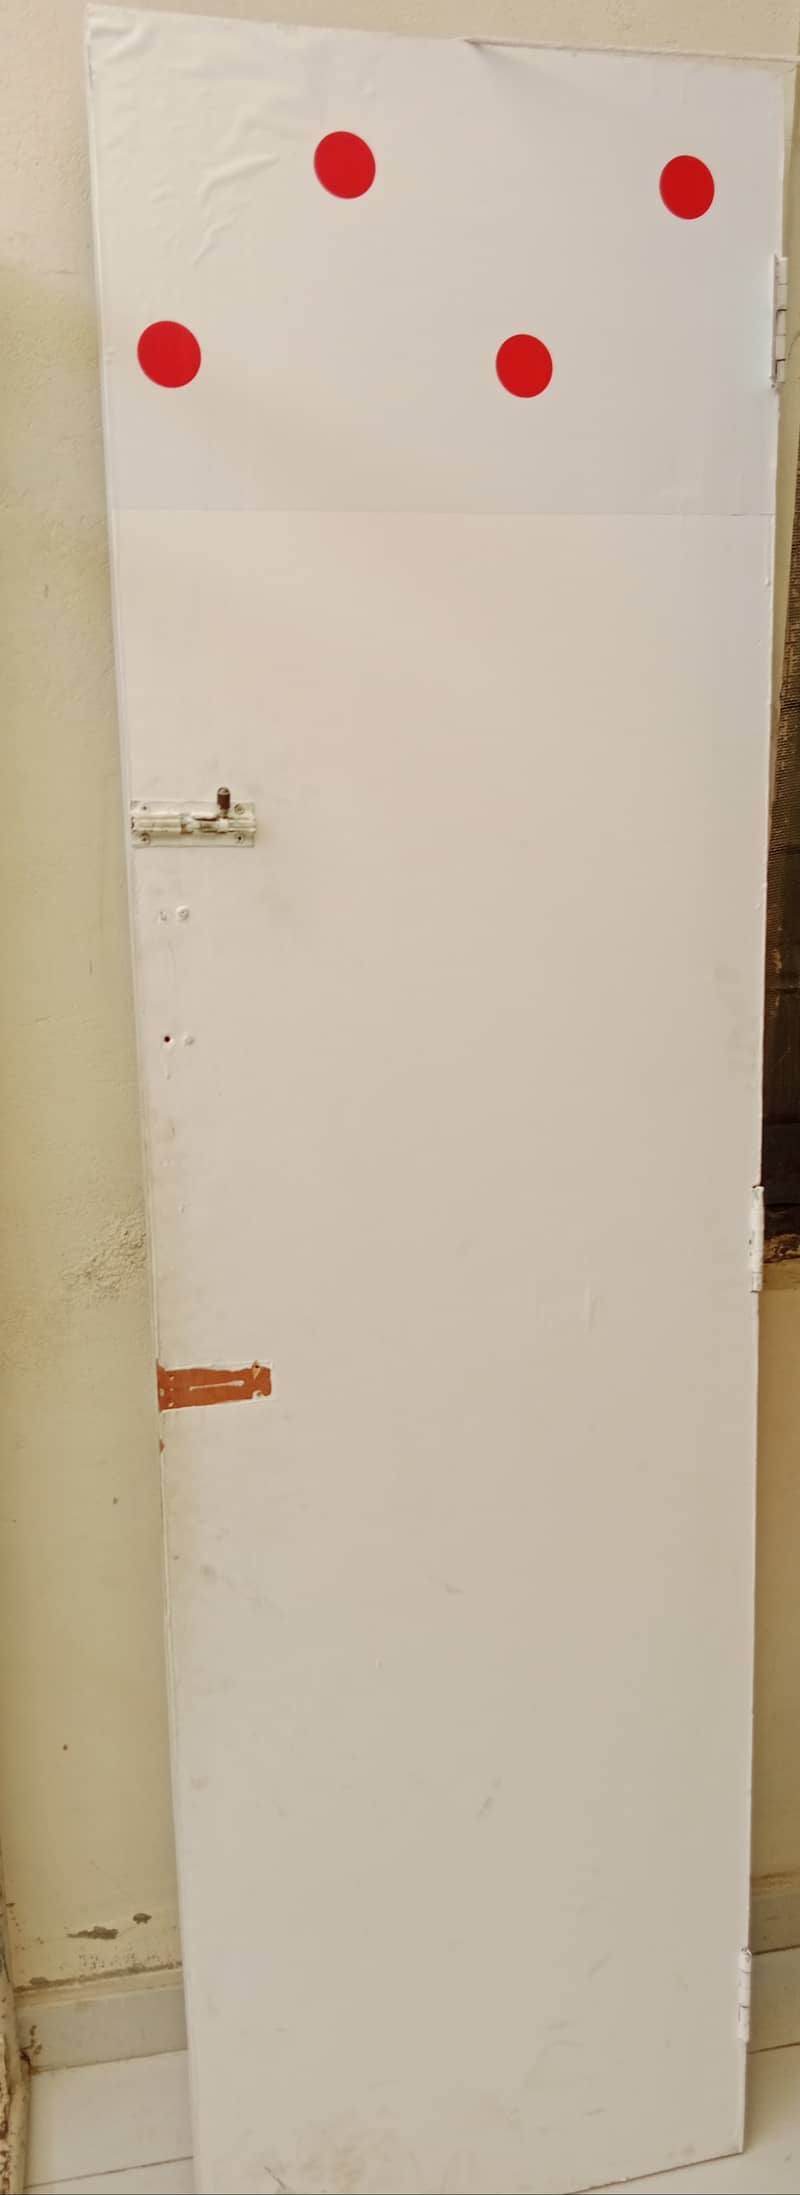 Door for sale neat and clean only WhatsUp 03060103003 15